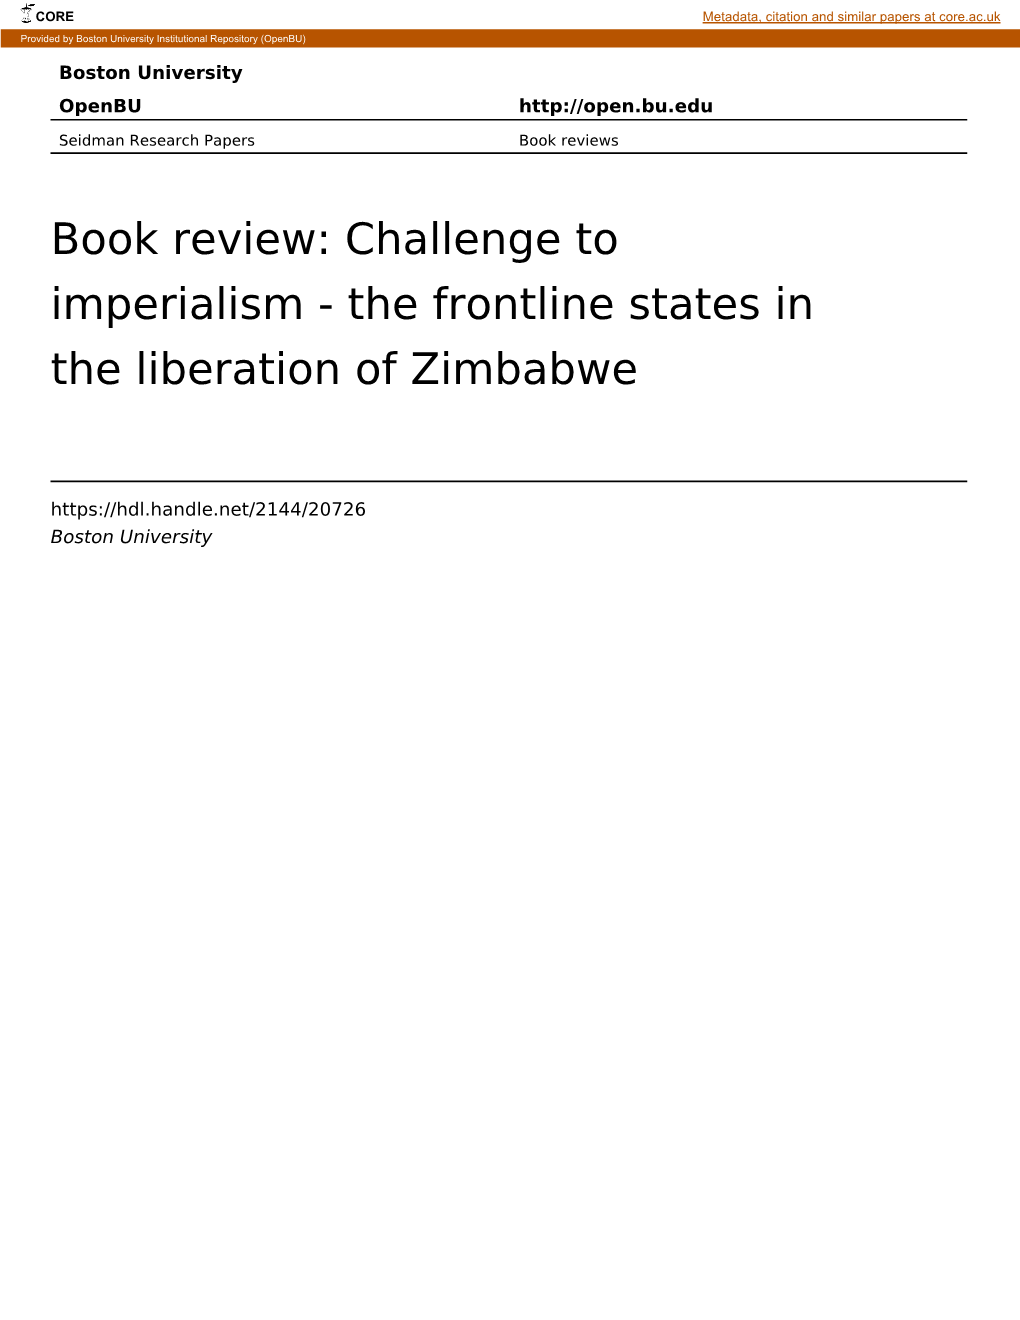 Book Review: Challenge to Imperialism - the Frontline States in the Liberation of Zimbabwe